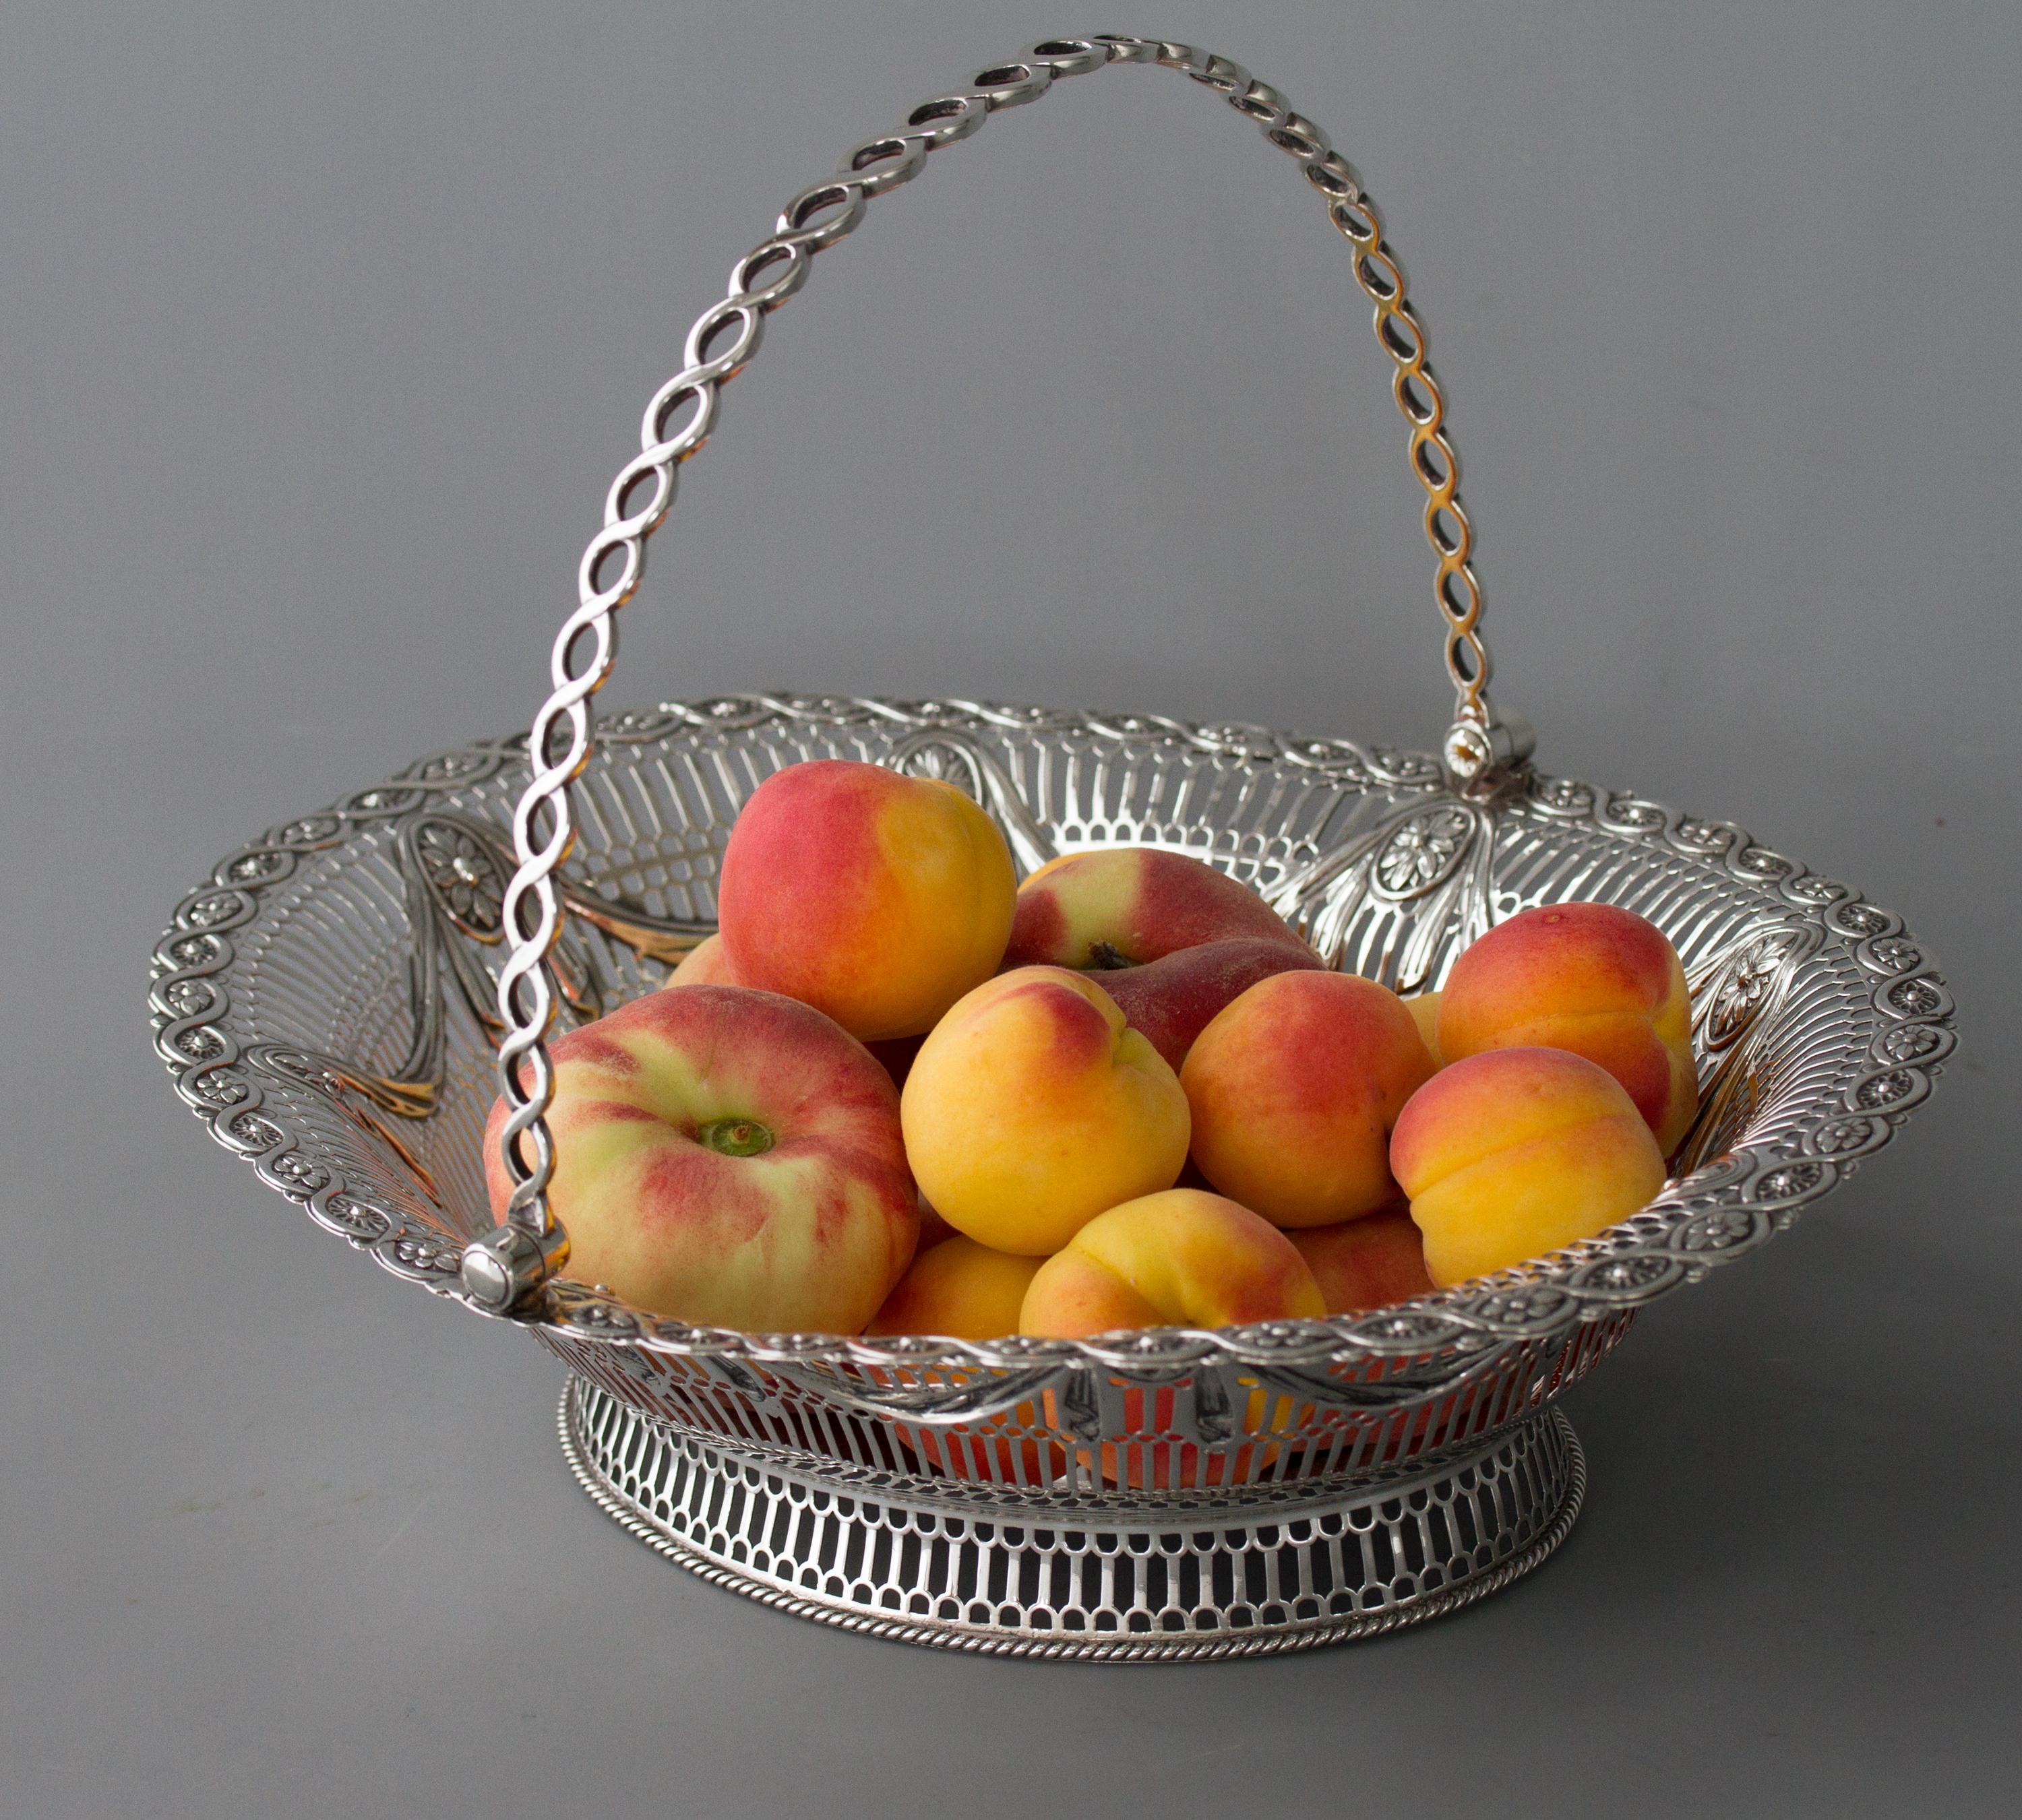 A superb oval George III silver basket by Aldridge & Green, London 1774. Of oval form, the pierced sides embossed and chased with a floral, swag drapery design, and floral boarder. Rope twist pierced handle all standing on a pierced